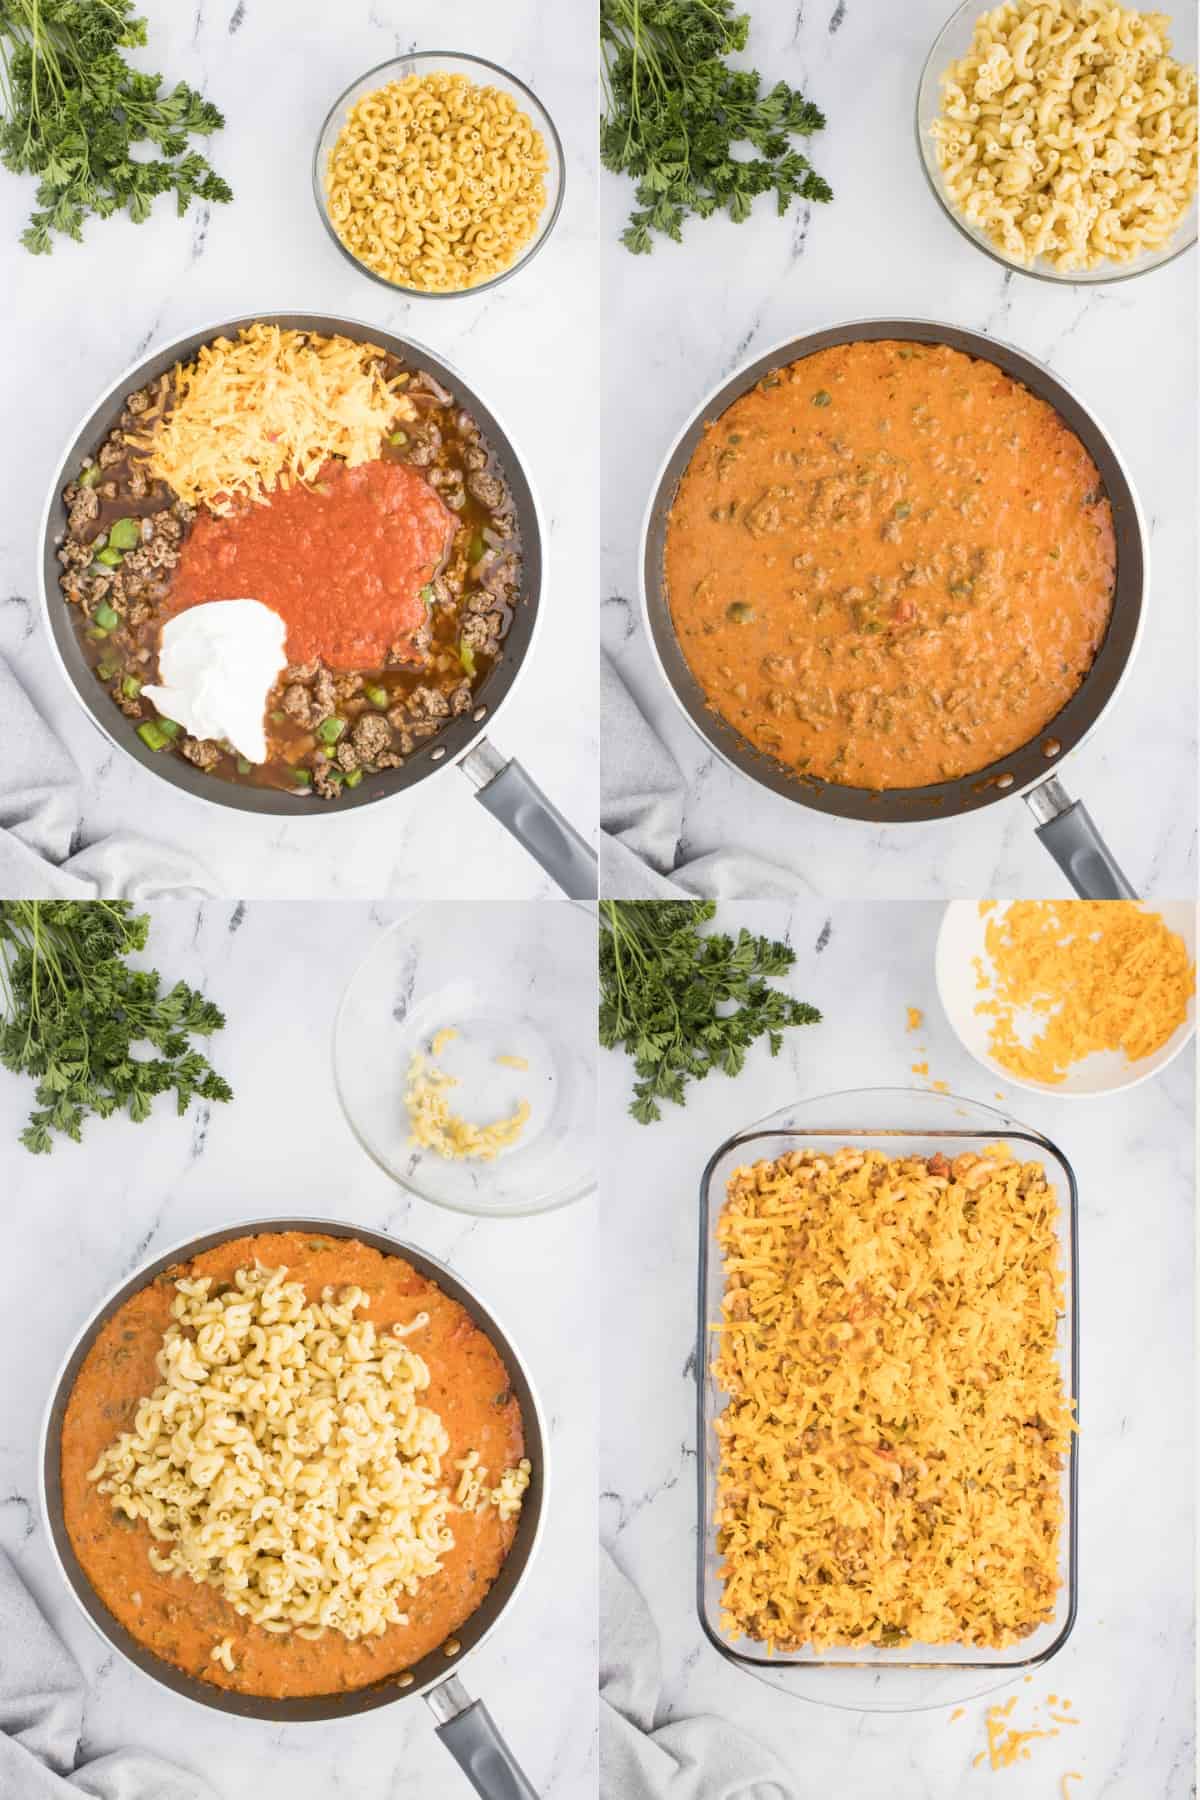 This four-image collage showcases the process of making Cheesy Hamburger Casserole. The first image displays a skillet with ground beef, seasonings, vegetables, sauces, cheese, and more. In the next image, the ingredients are combined. The third image shows cooked elbow pasta being added. The final image reveals the mixture transferred to a casserole dish, topped with cheese, and ready for baking.